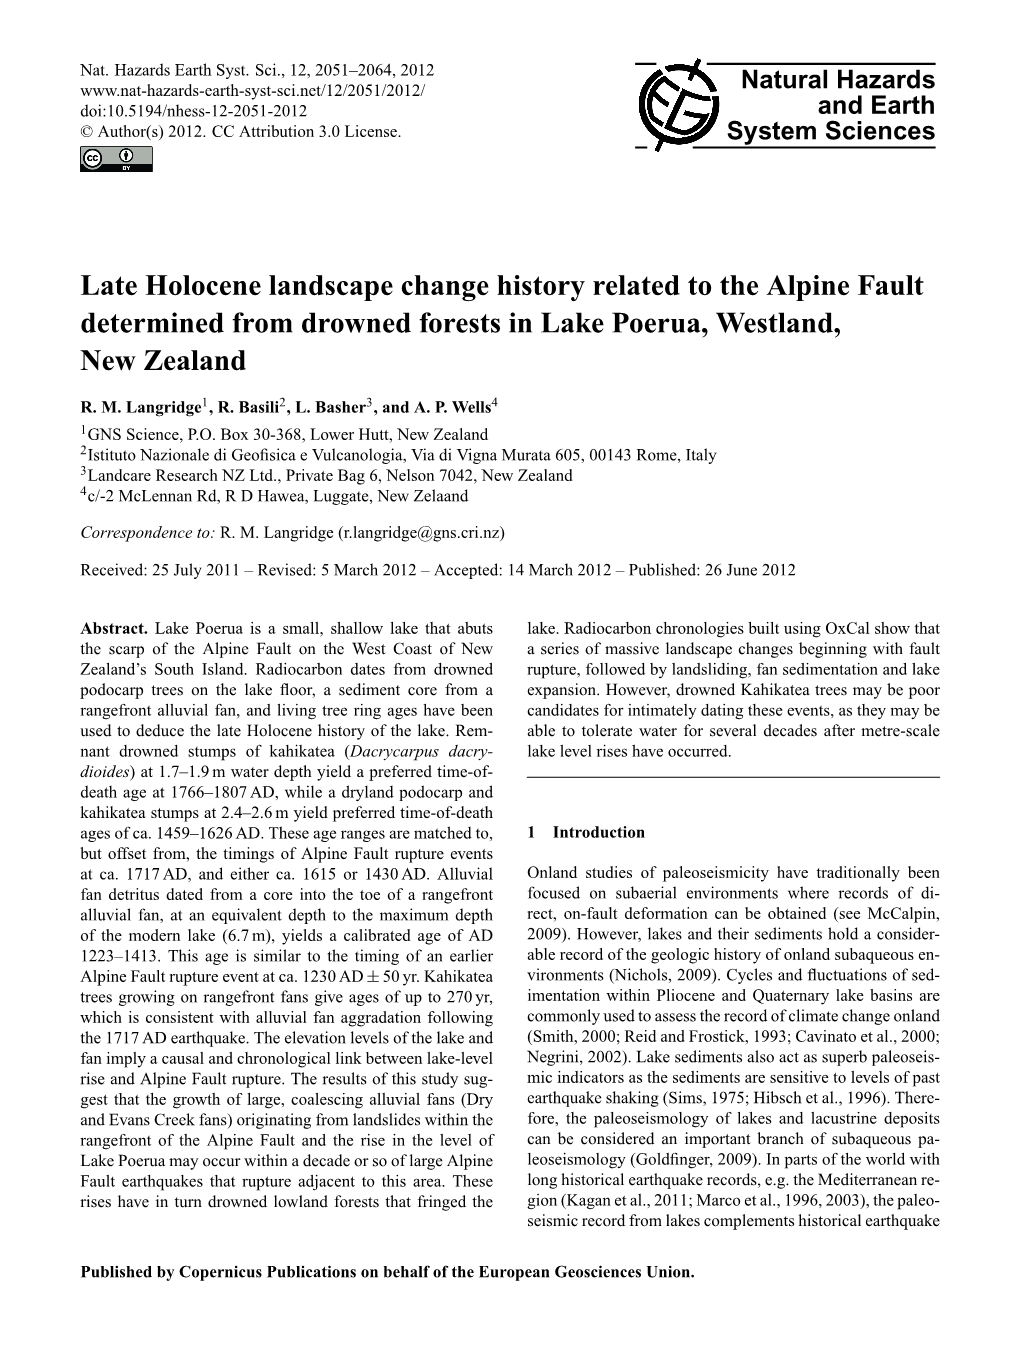 Late Holocene Landscape Change History Related to the Alpine Fault Determined from Drowned Forests in Lake Poerua, Westland, New Zealand